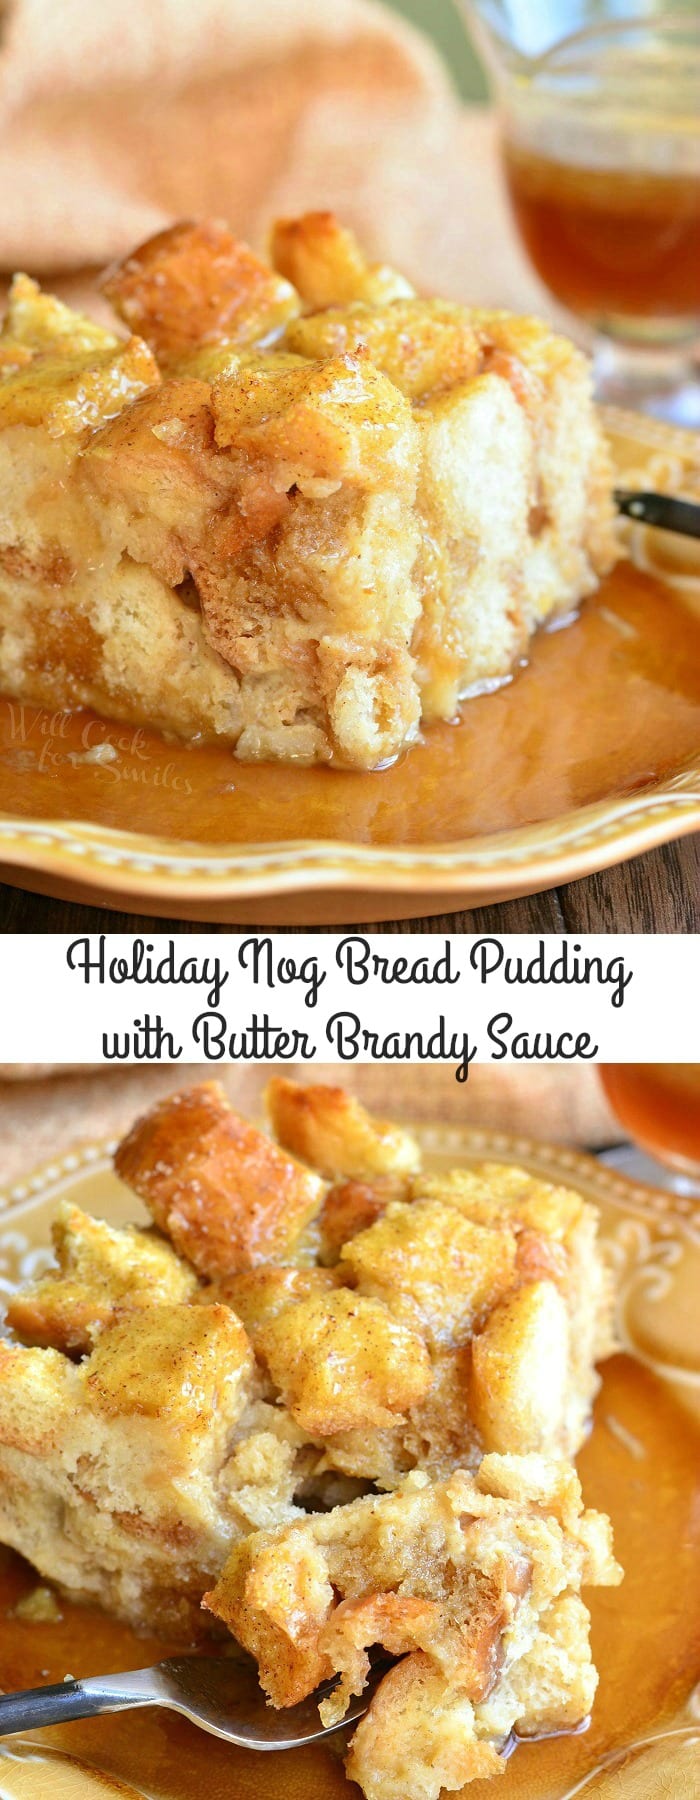 Eggnog Bread Pudding with Butter Brandy Sauce on a plate photo collage 